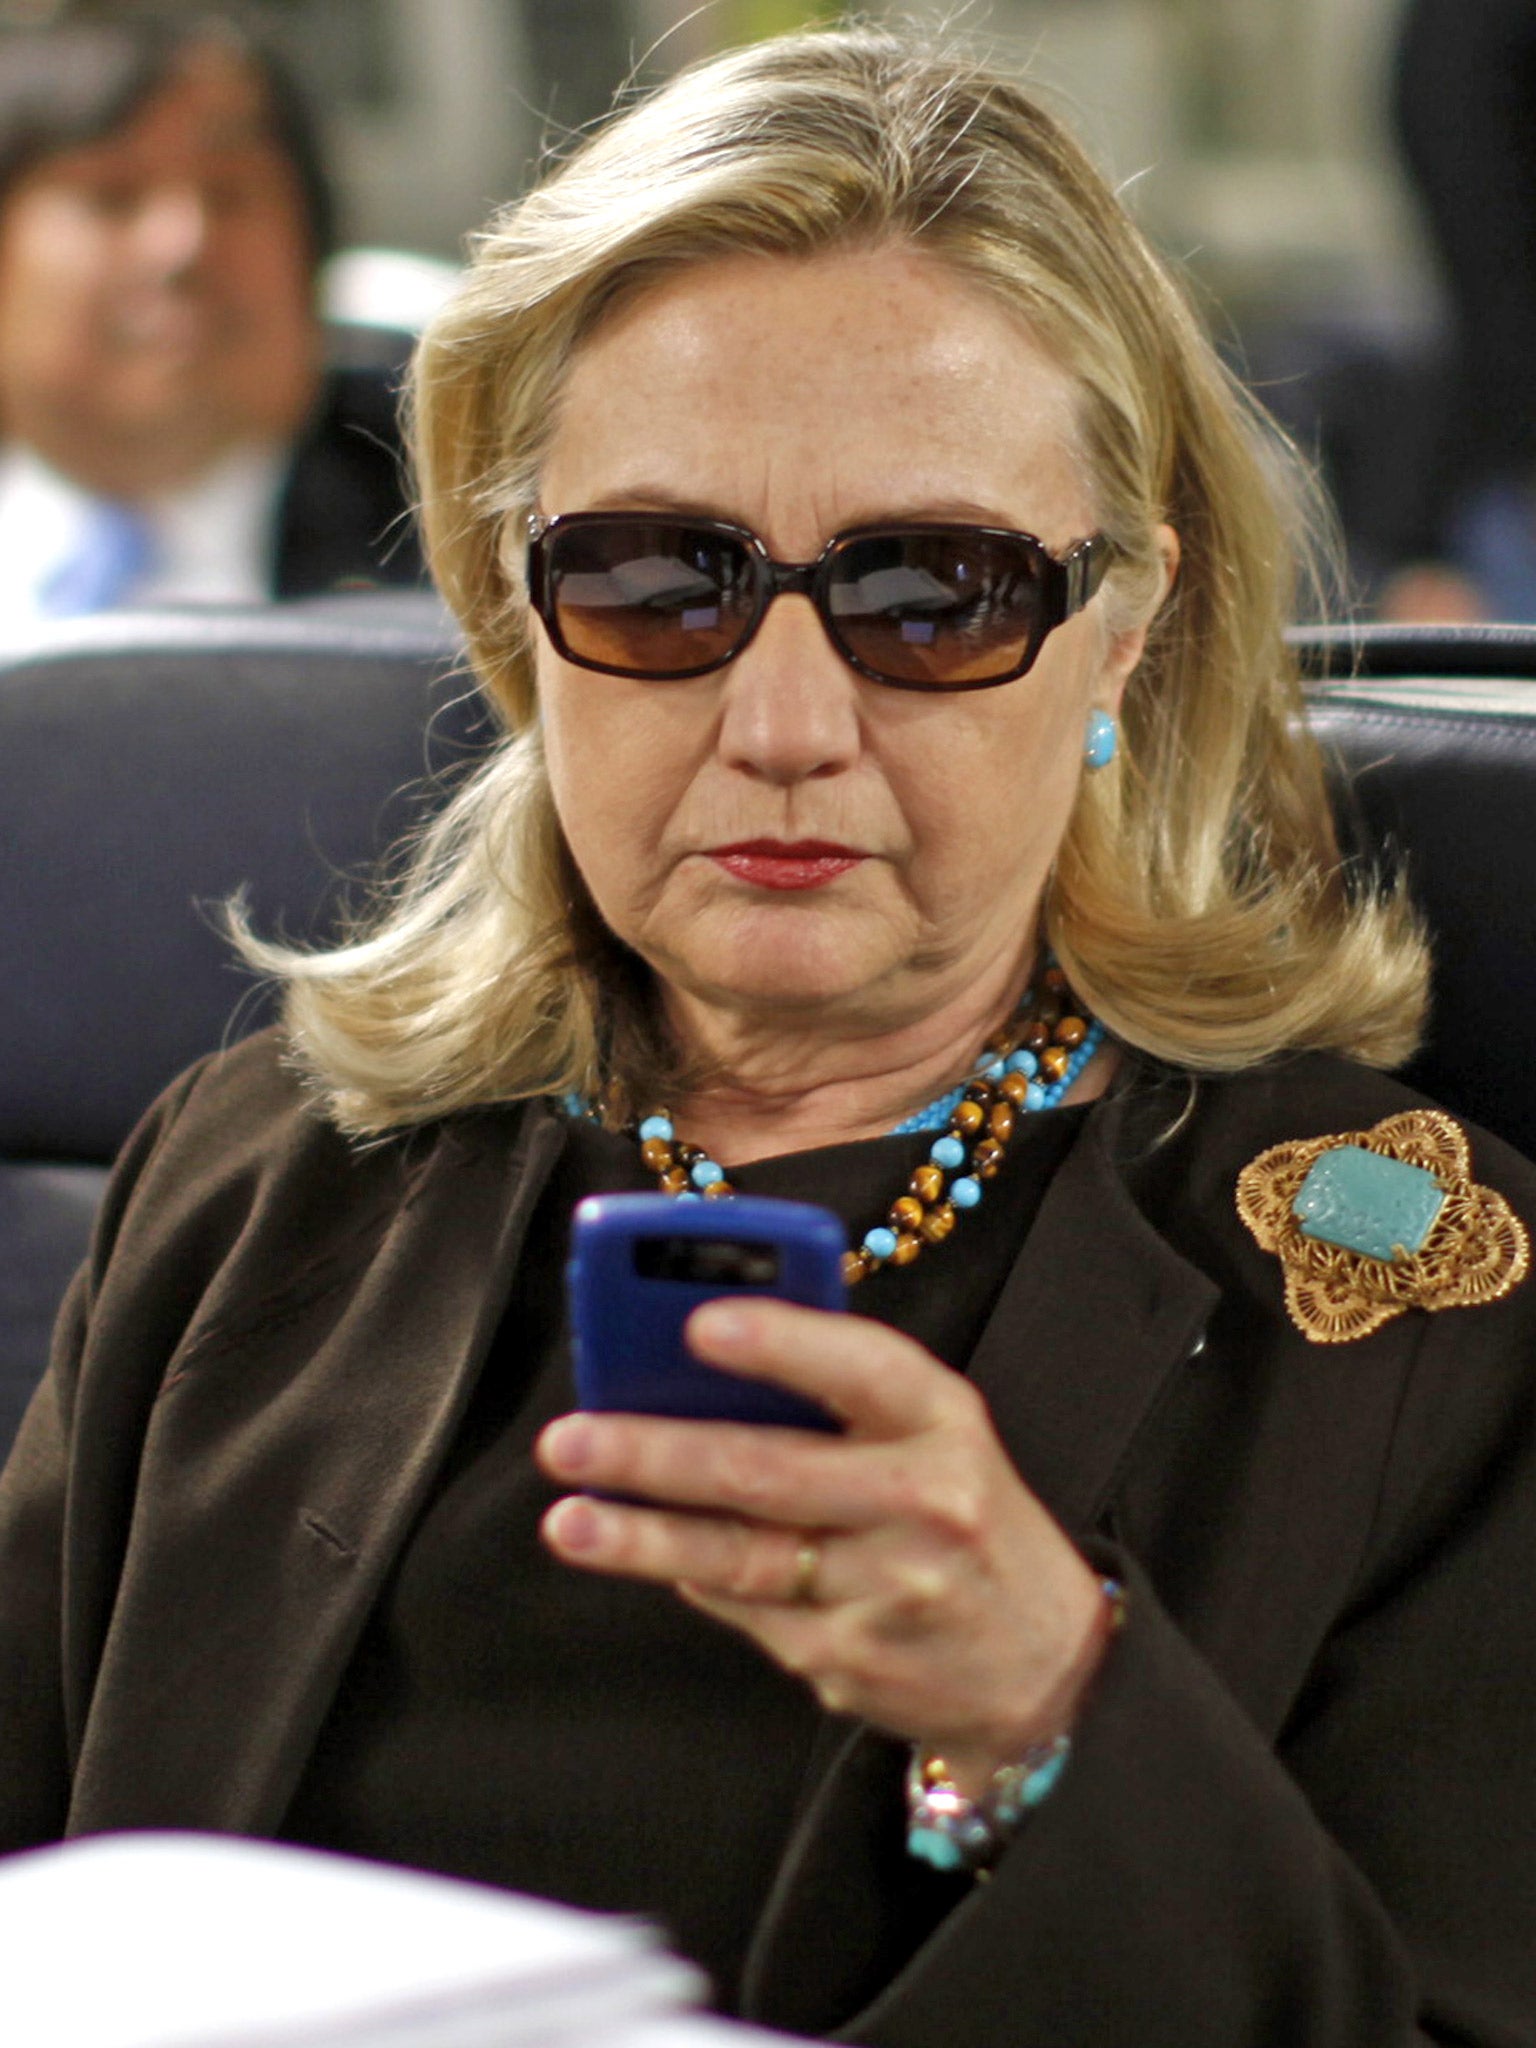 Hillary Clinton has taken to Twitter with the savvy of a seasoned user